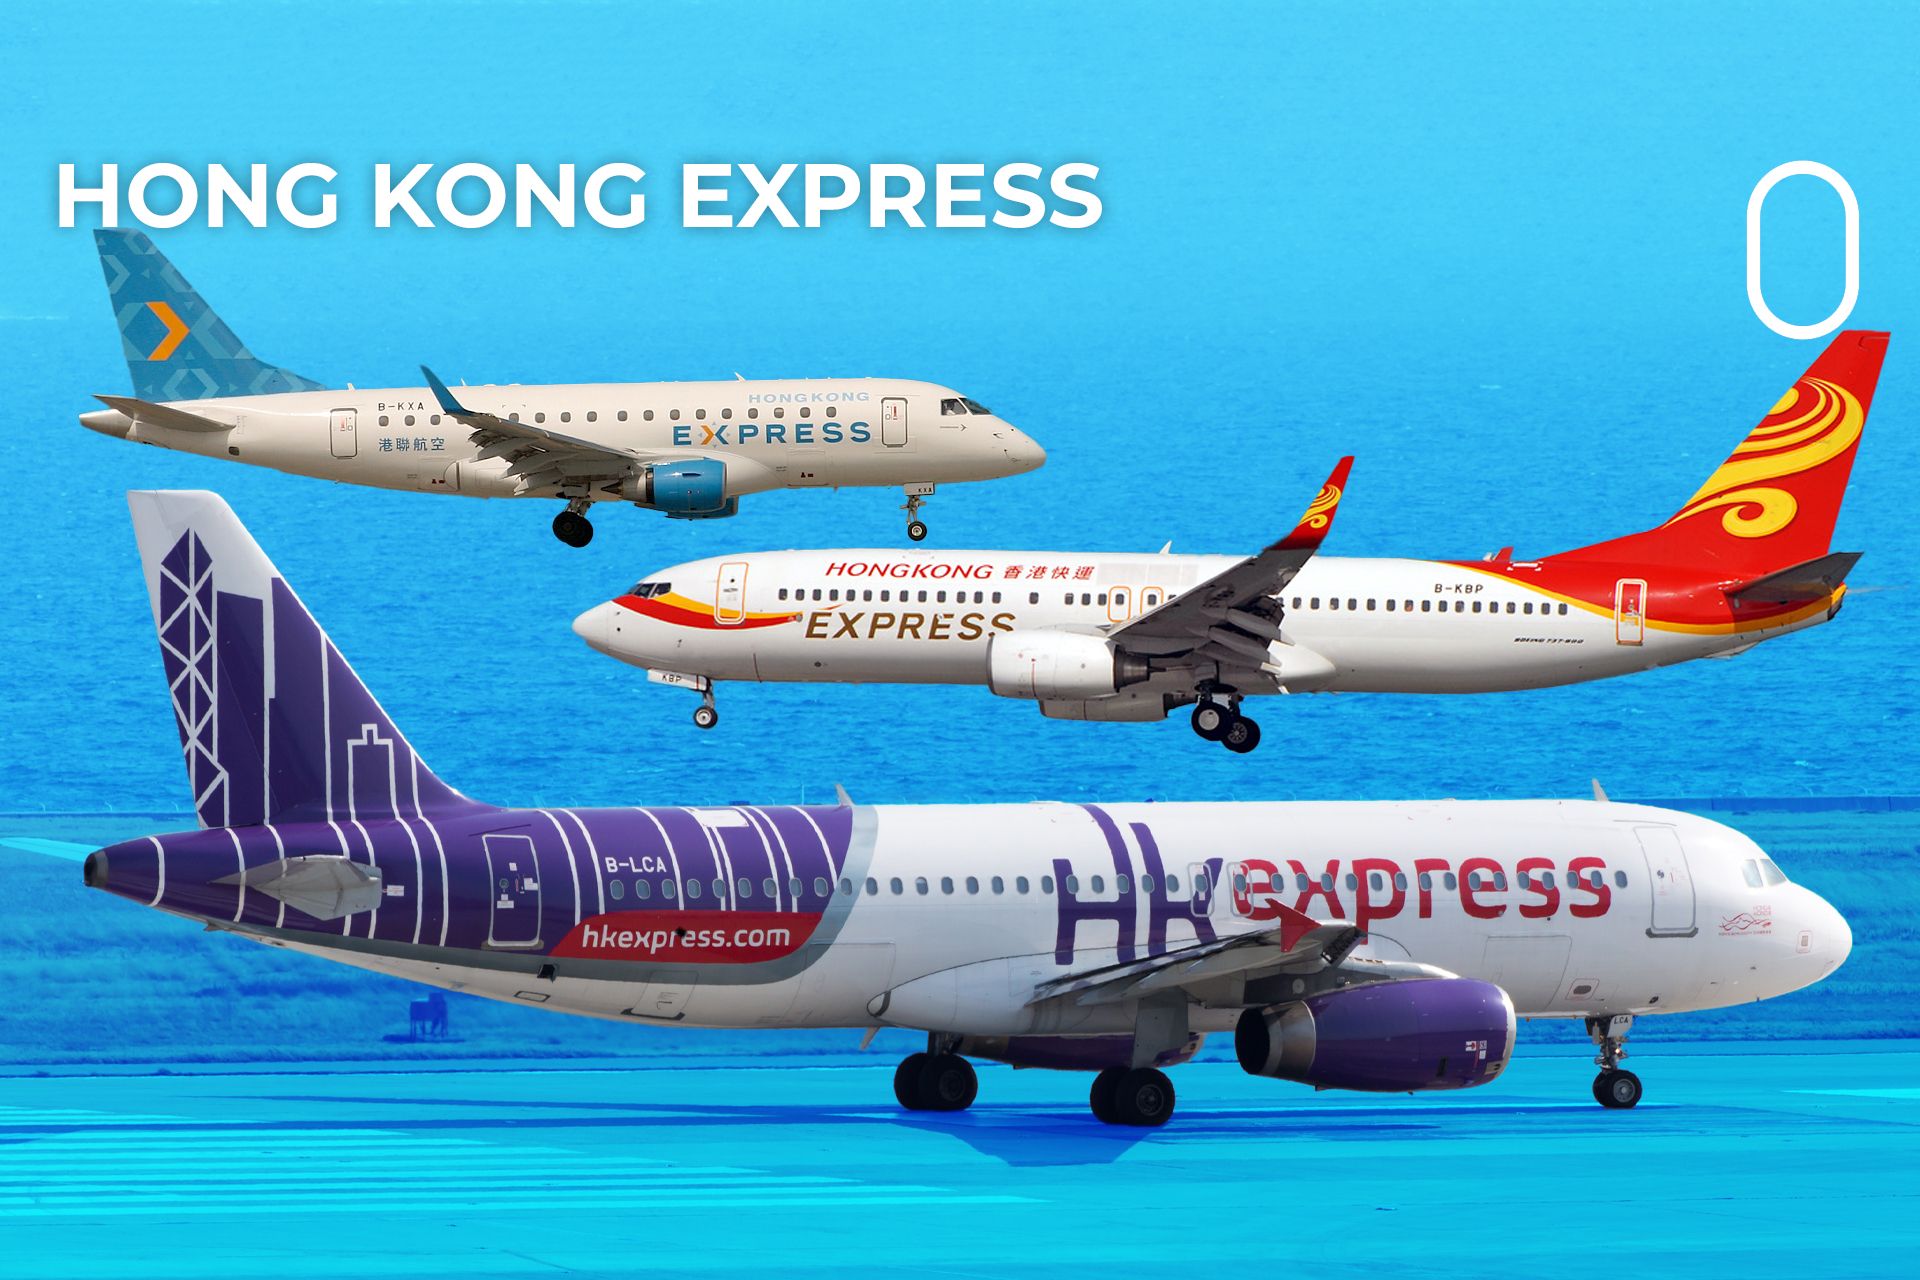 HK Express: A Complete History